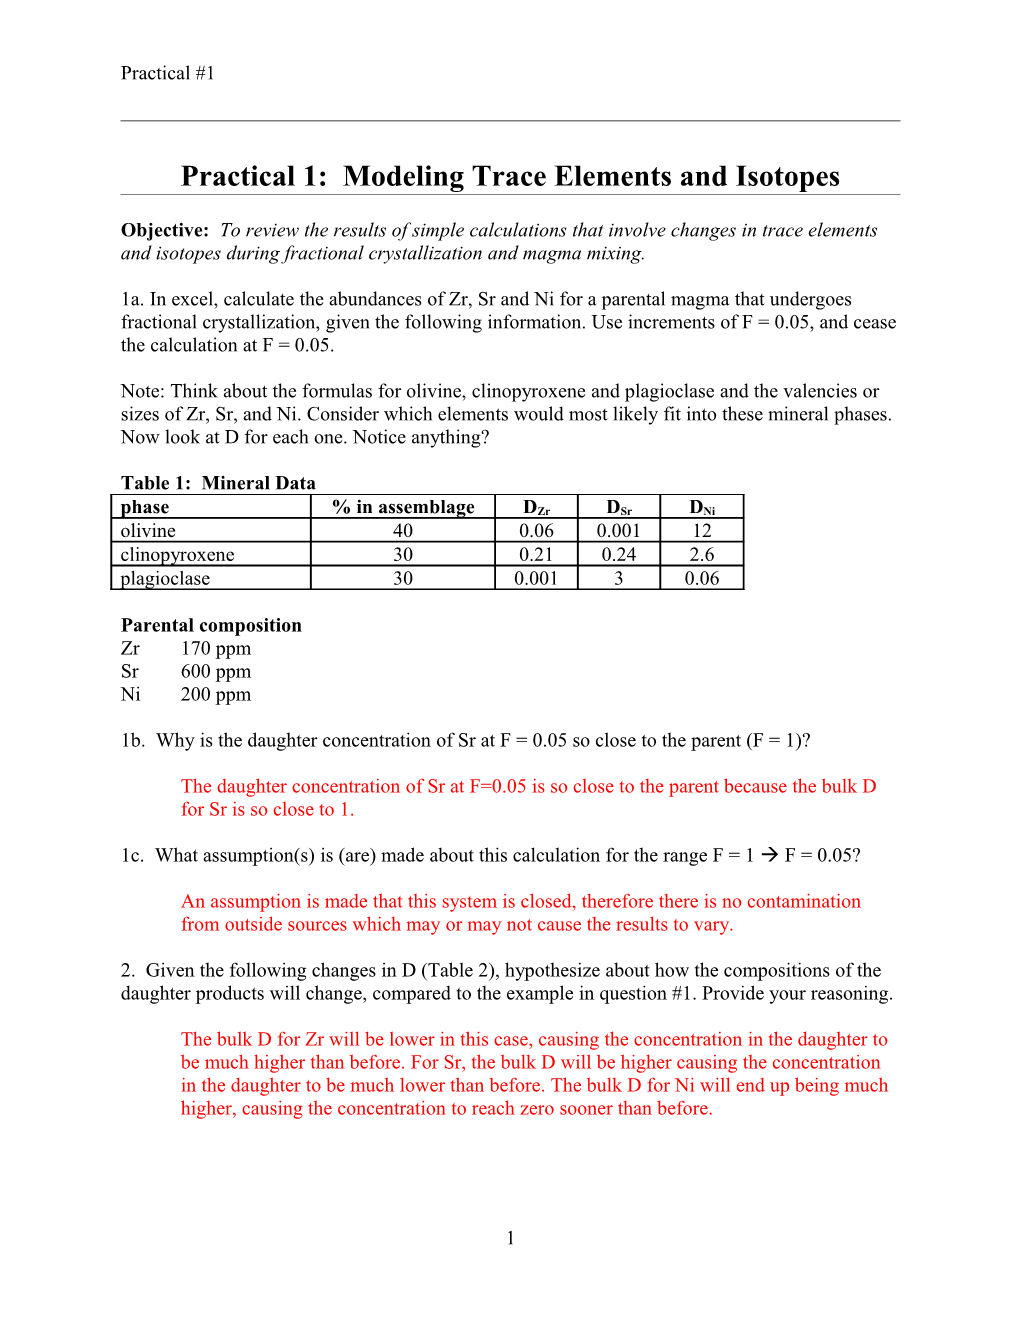 Practical 1: Modeling Trace Elements and Isotopes